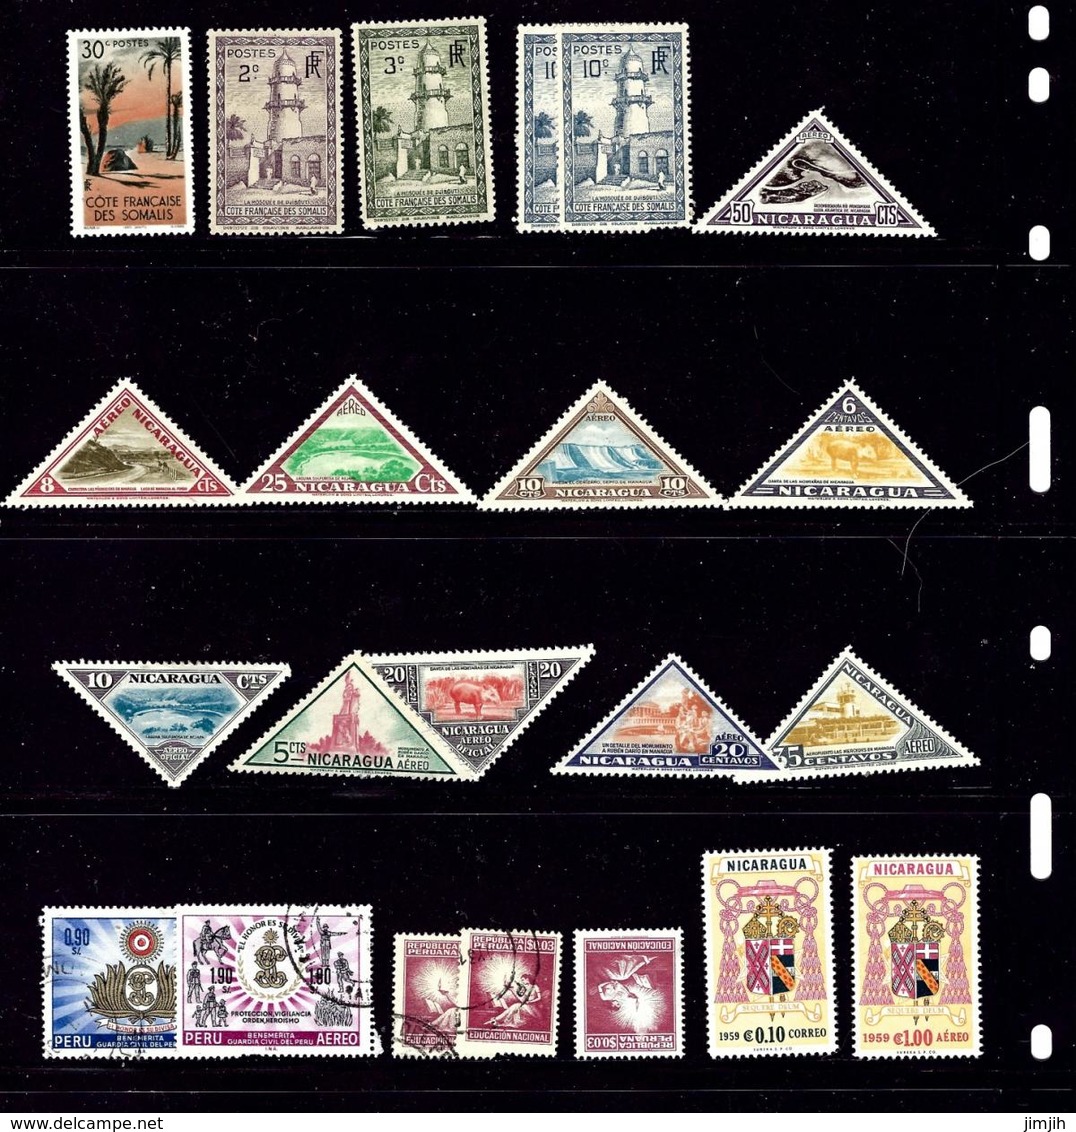 WW20 22 Stamps; 2 Dups; Most Nicaragua; Most Unused - Lots & Kiloware (mixtures) - Max. 999 Stamps